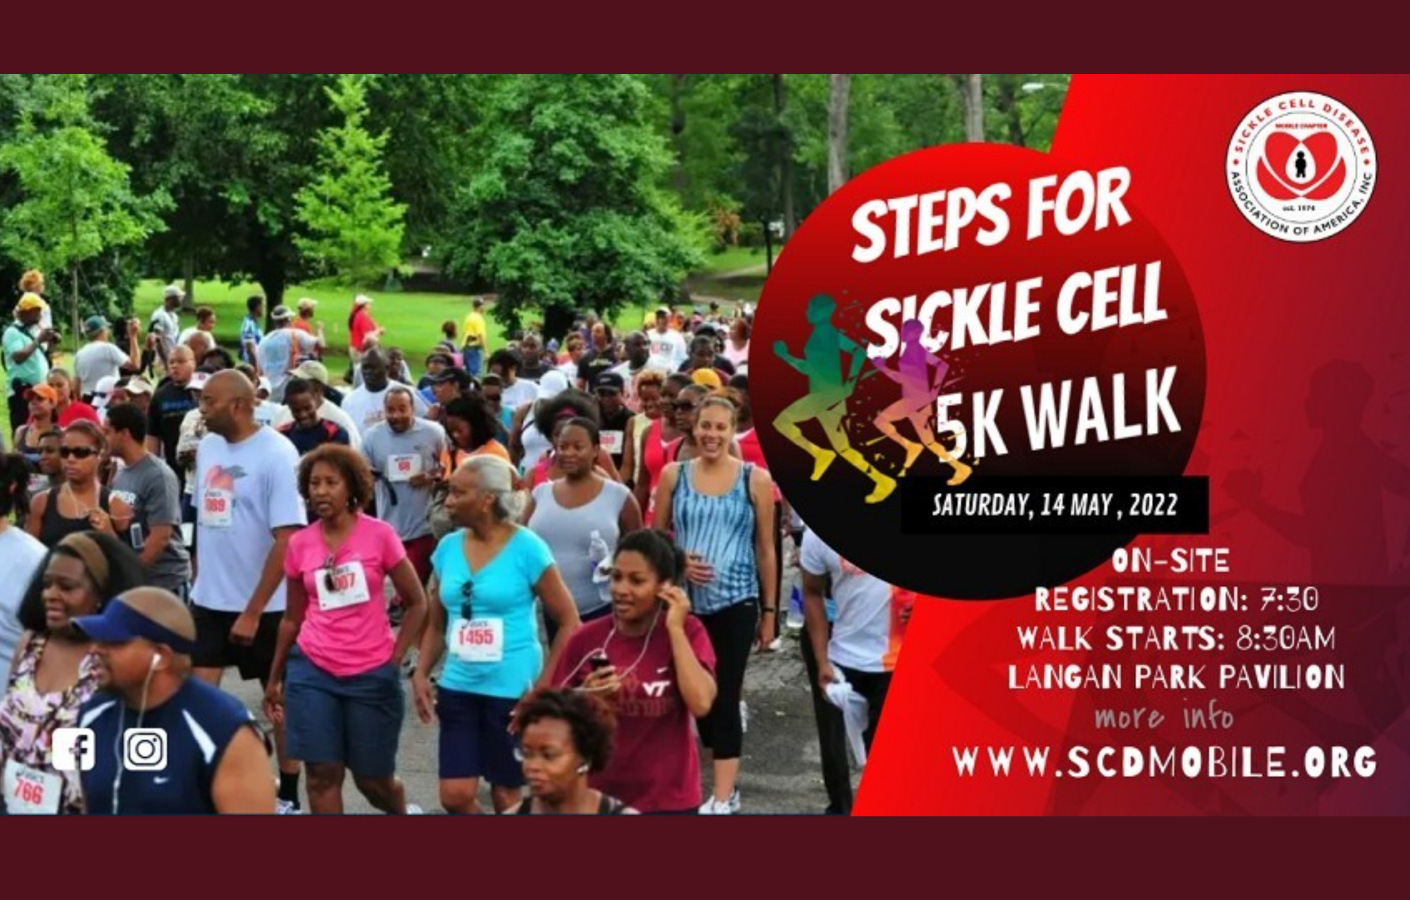 STEPS FOR SICKLE CELL 5K WALK